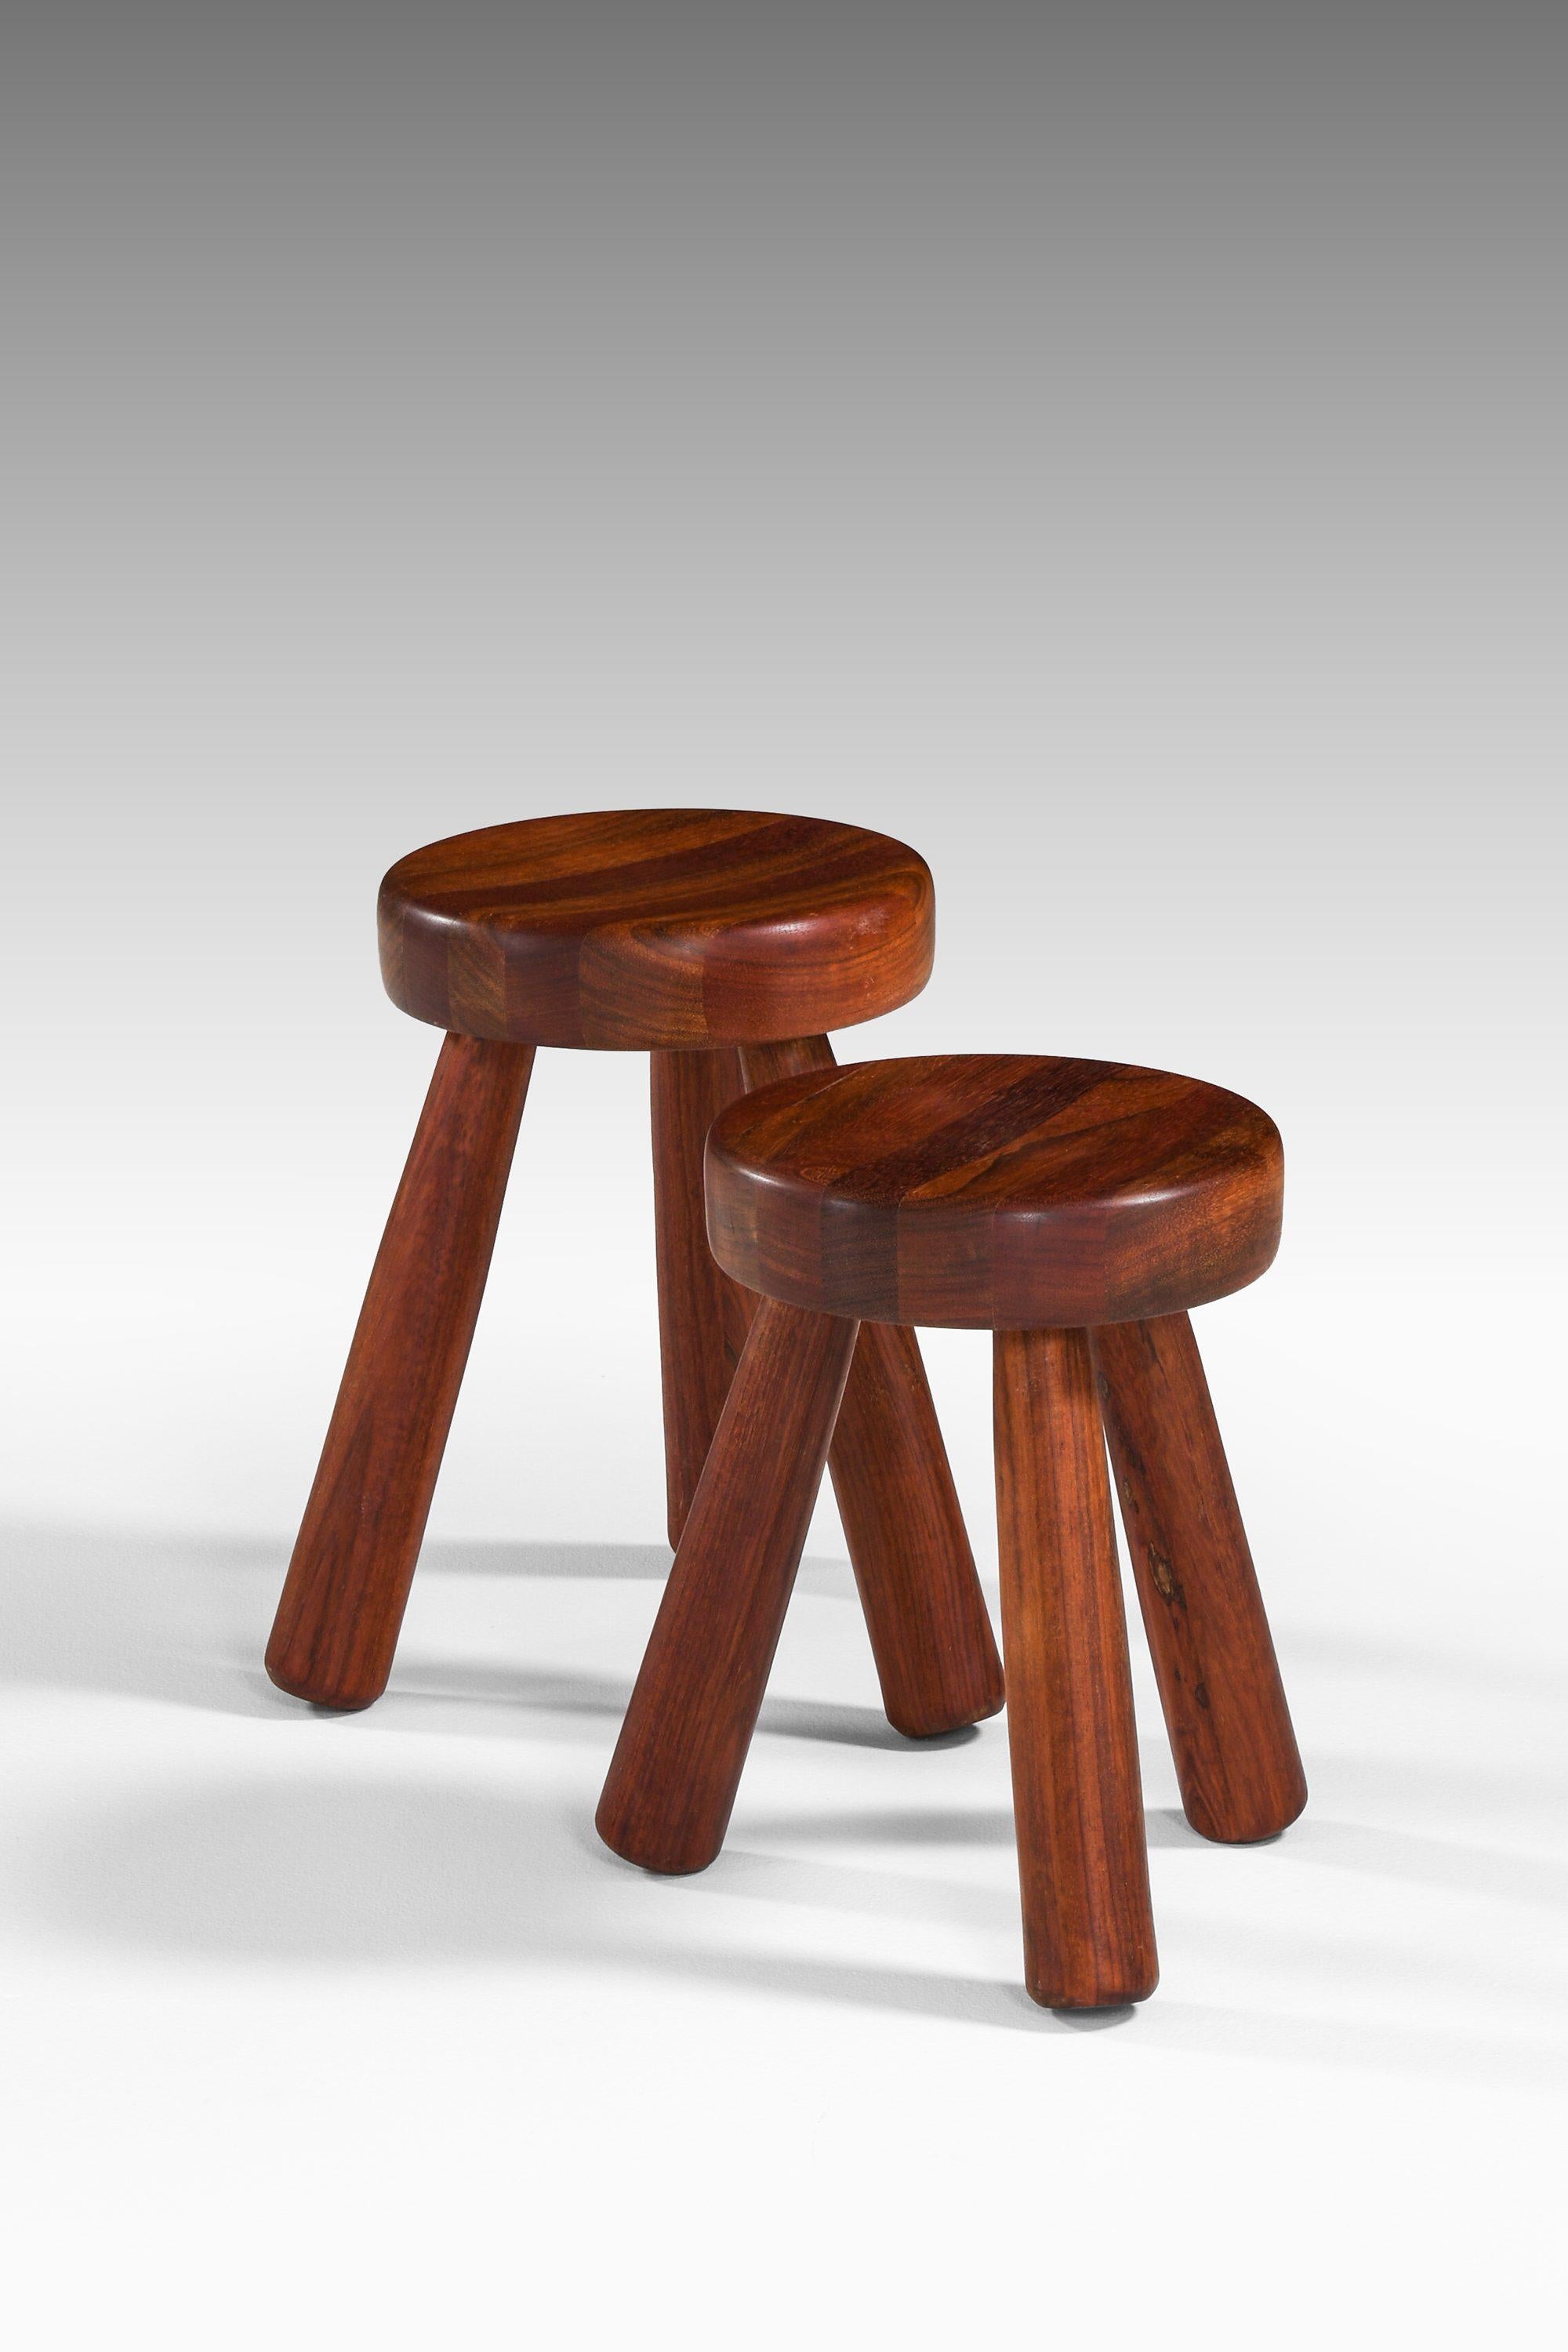 Small Stool in Jatoba Wood by Ingvar Hildingsson, 1980's In Good Condition For Sale In Limhamn, Skåne län